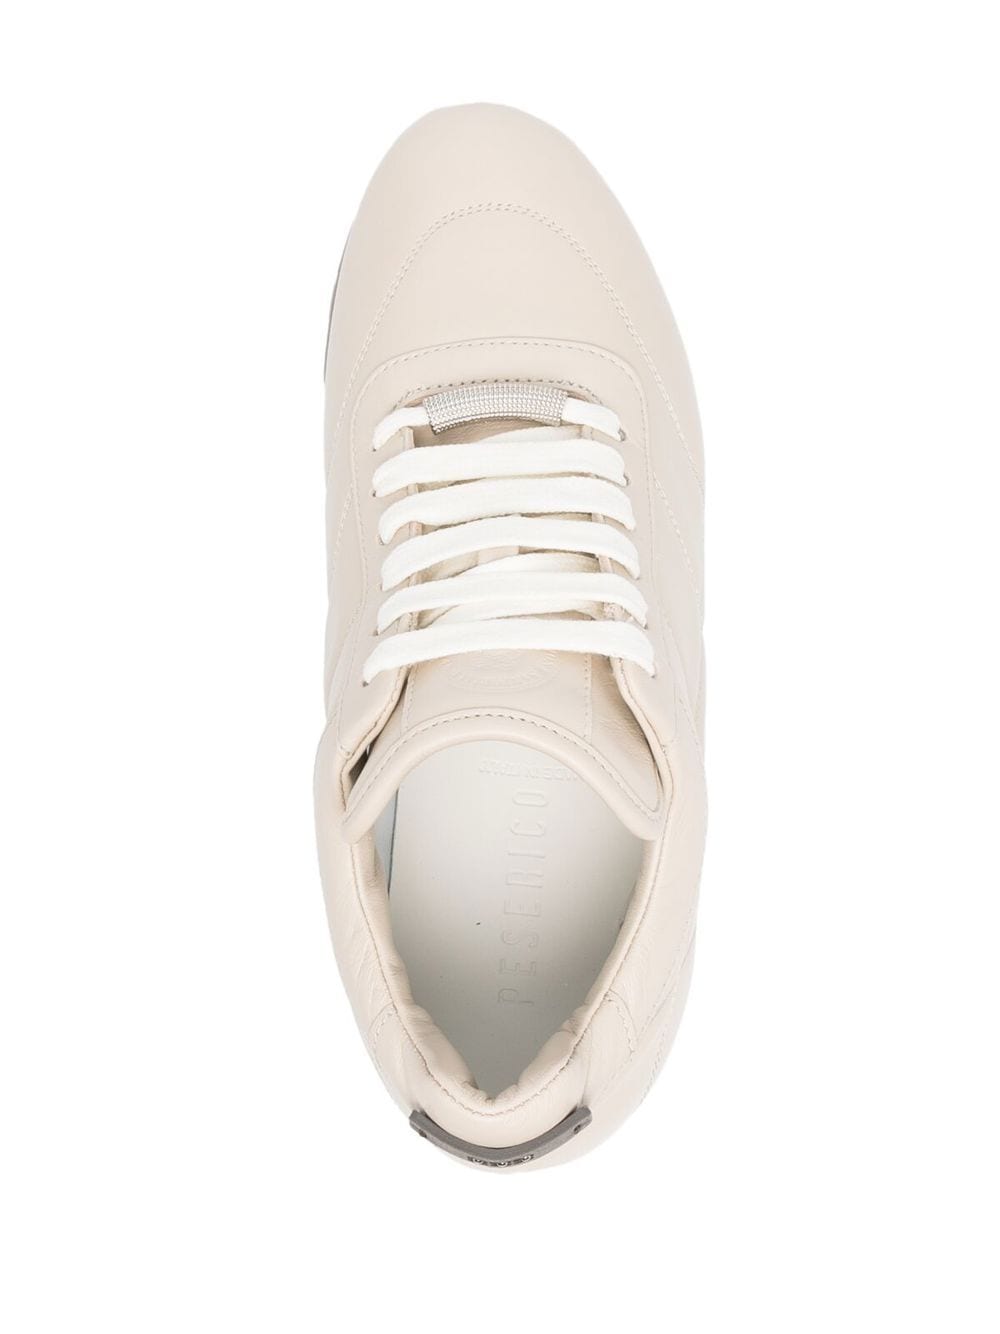 Peserico Leather tonal-stitched Sneakers - Farfetch